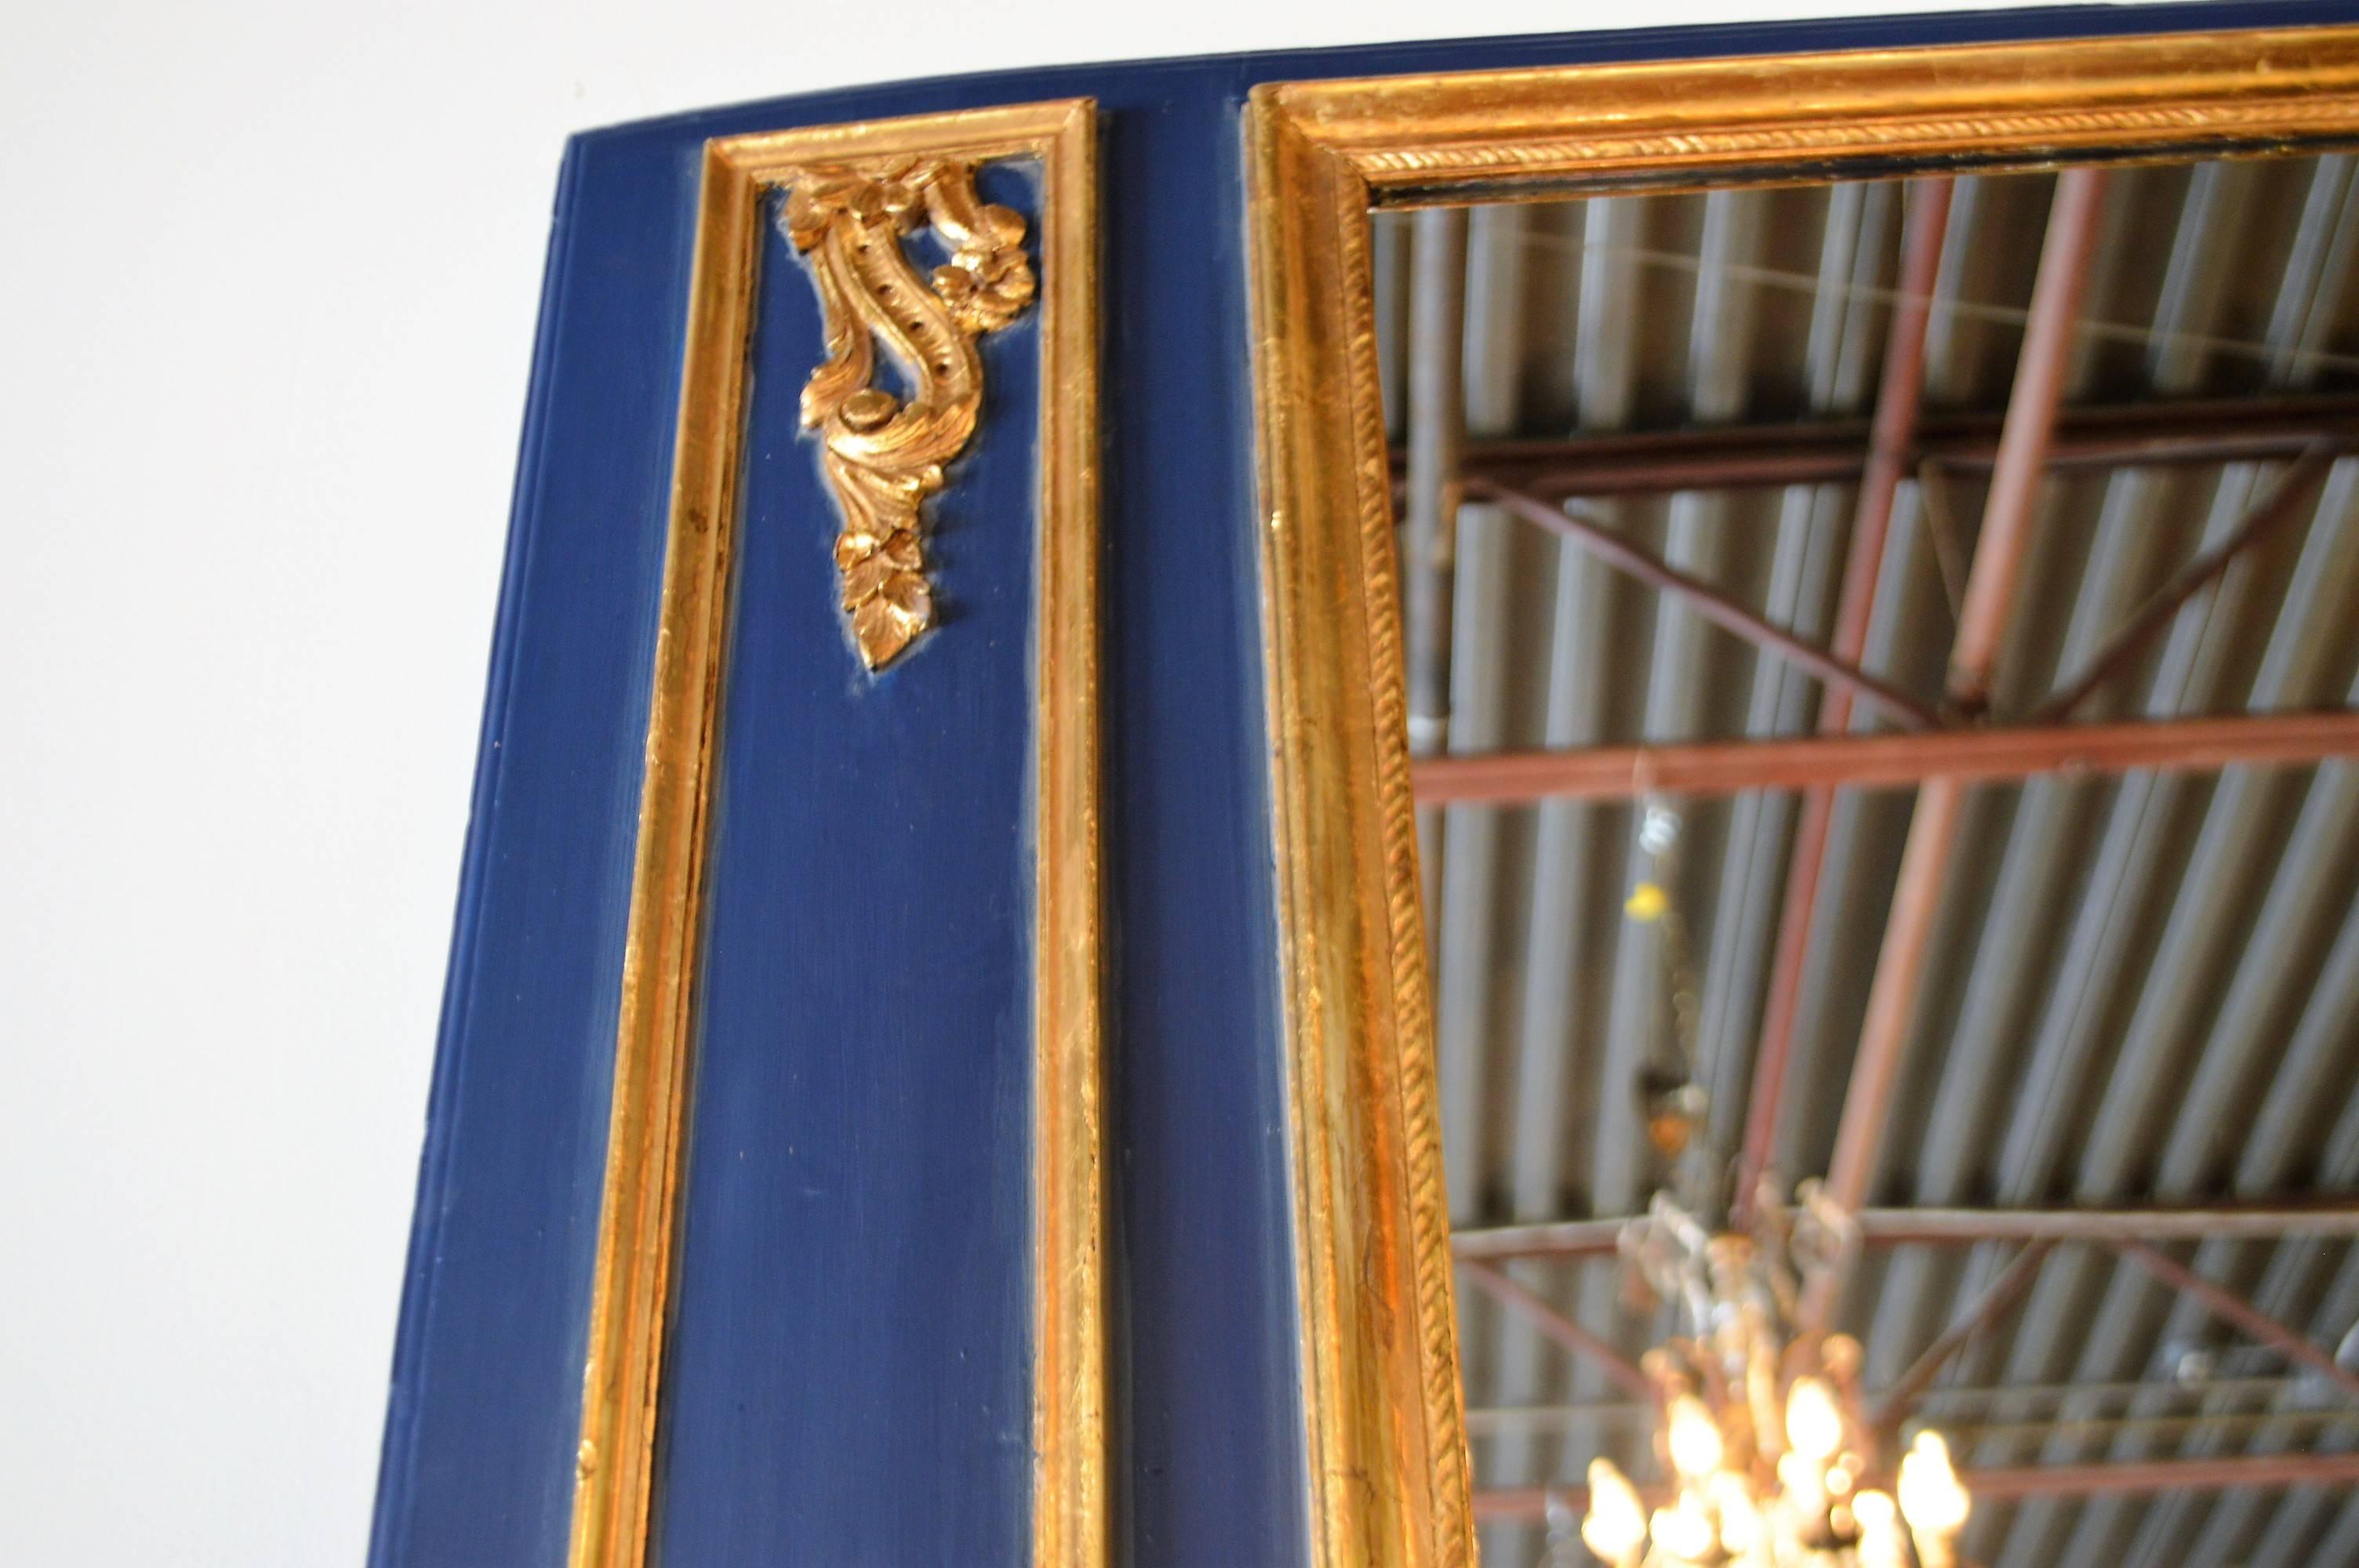 19th Century Louis XVI Style Trumeau Mirror Painted Dark Blue with Gilt Details Accents